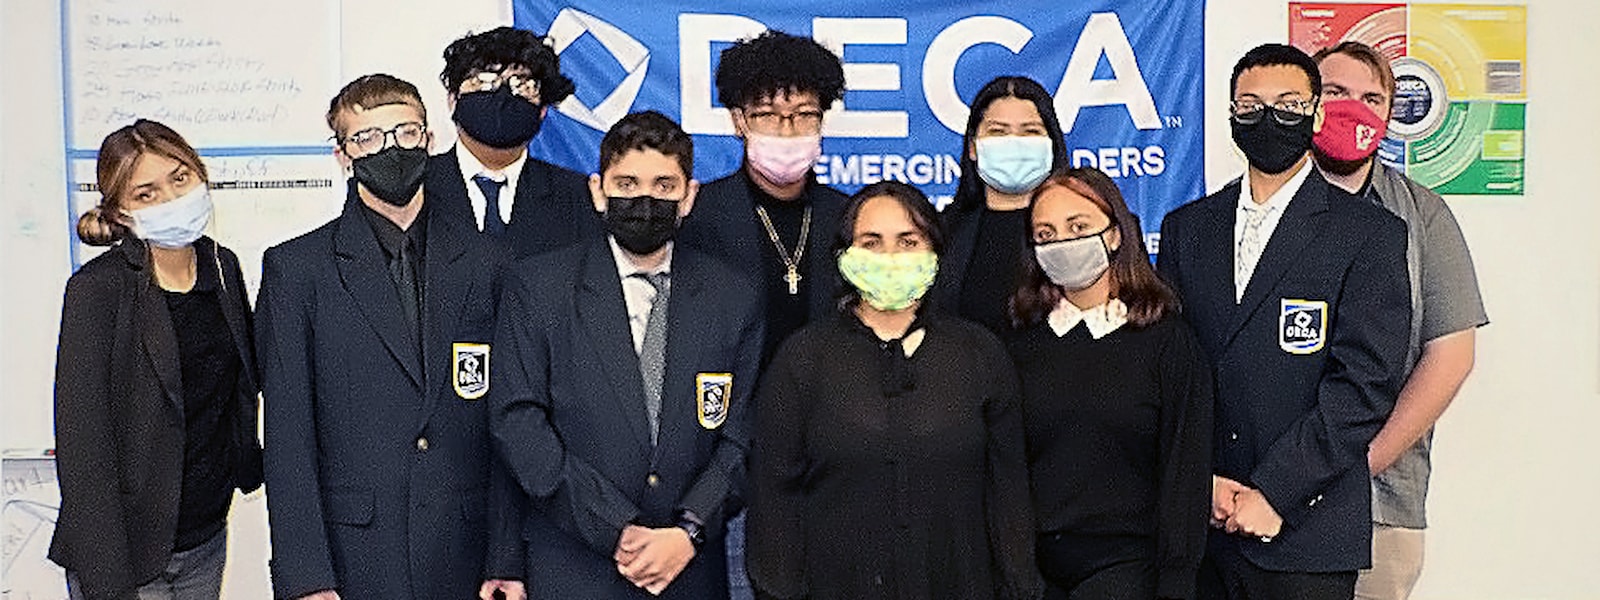 DECA students pose for a photo.